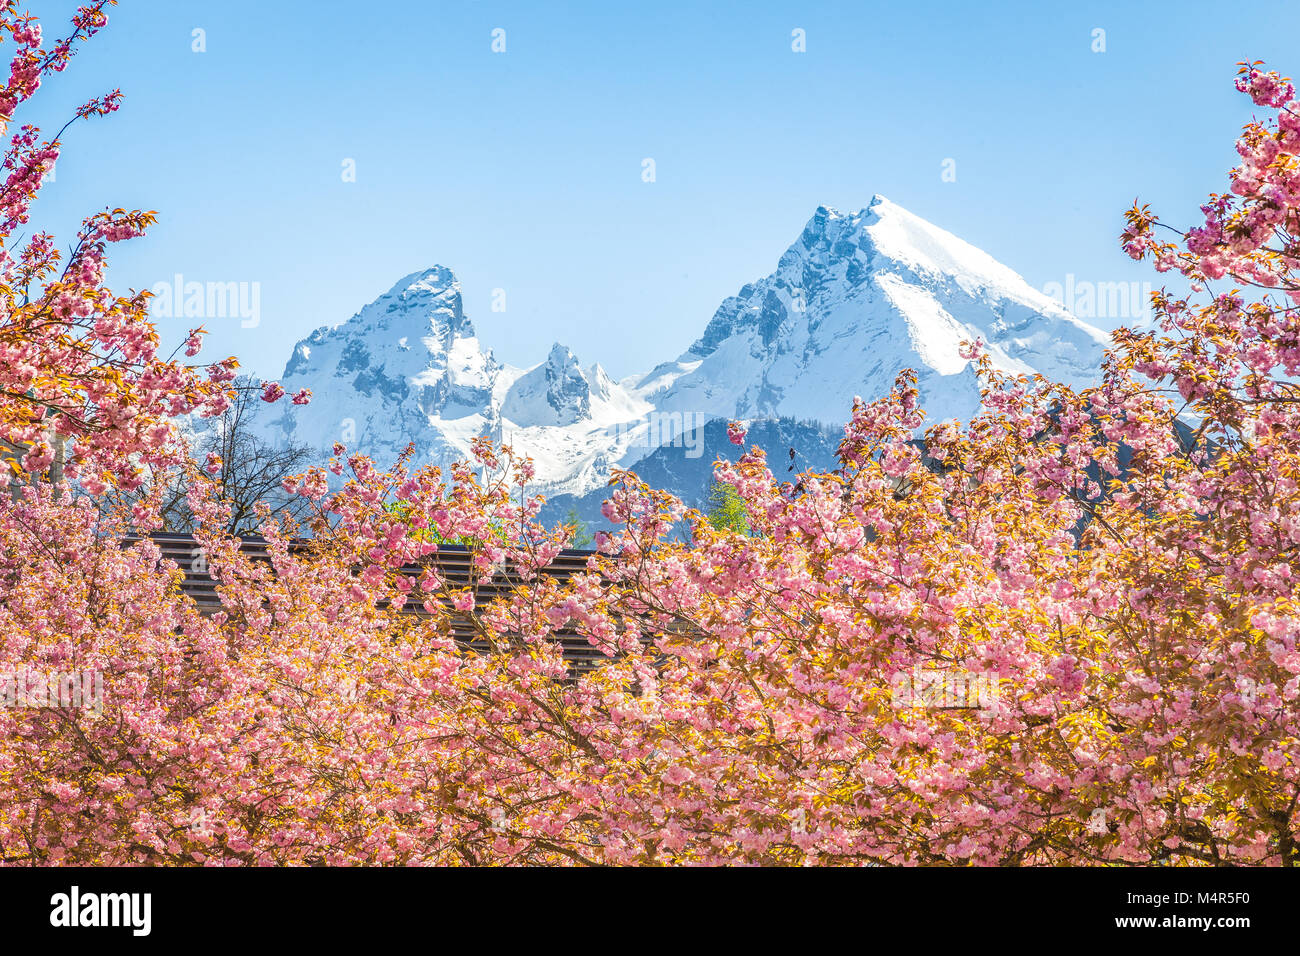 Scenic view of famous Watzmann mountain peak with cherry blossoms on a sunny day with blue sky in springtime, Berchtesgadener Land, Bavaria, Germany Stock Photo